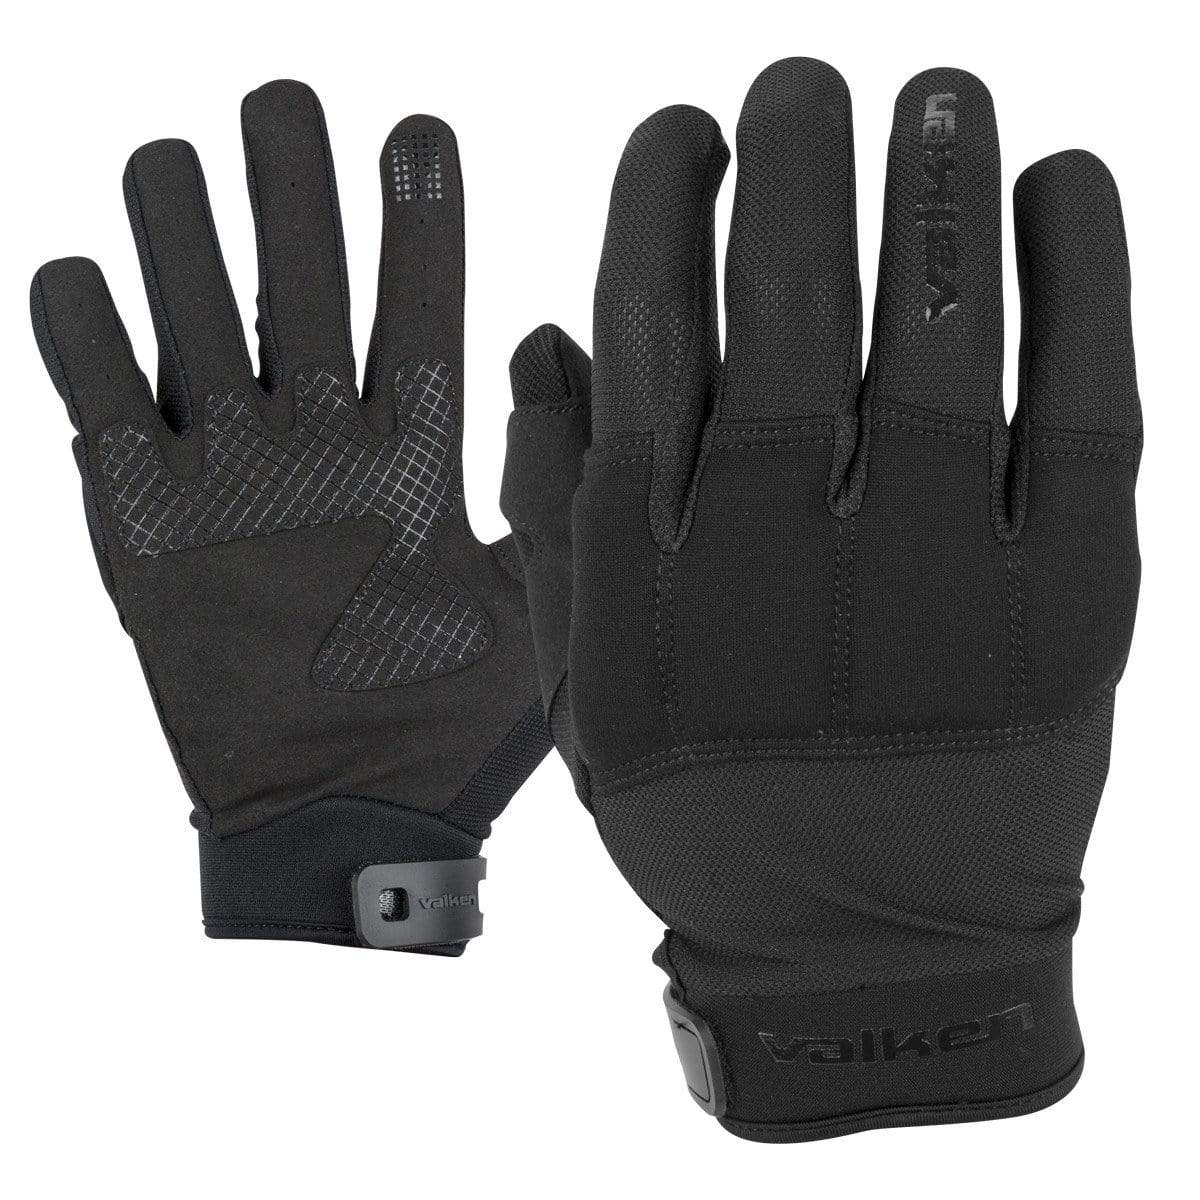 Kilo Tactical Gloves - Black - Eminent Paintball And Airsoft